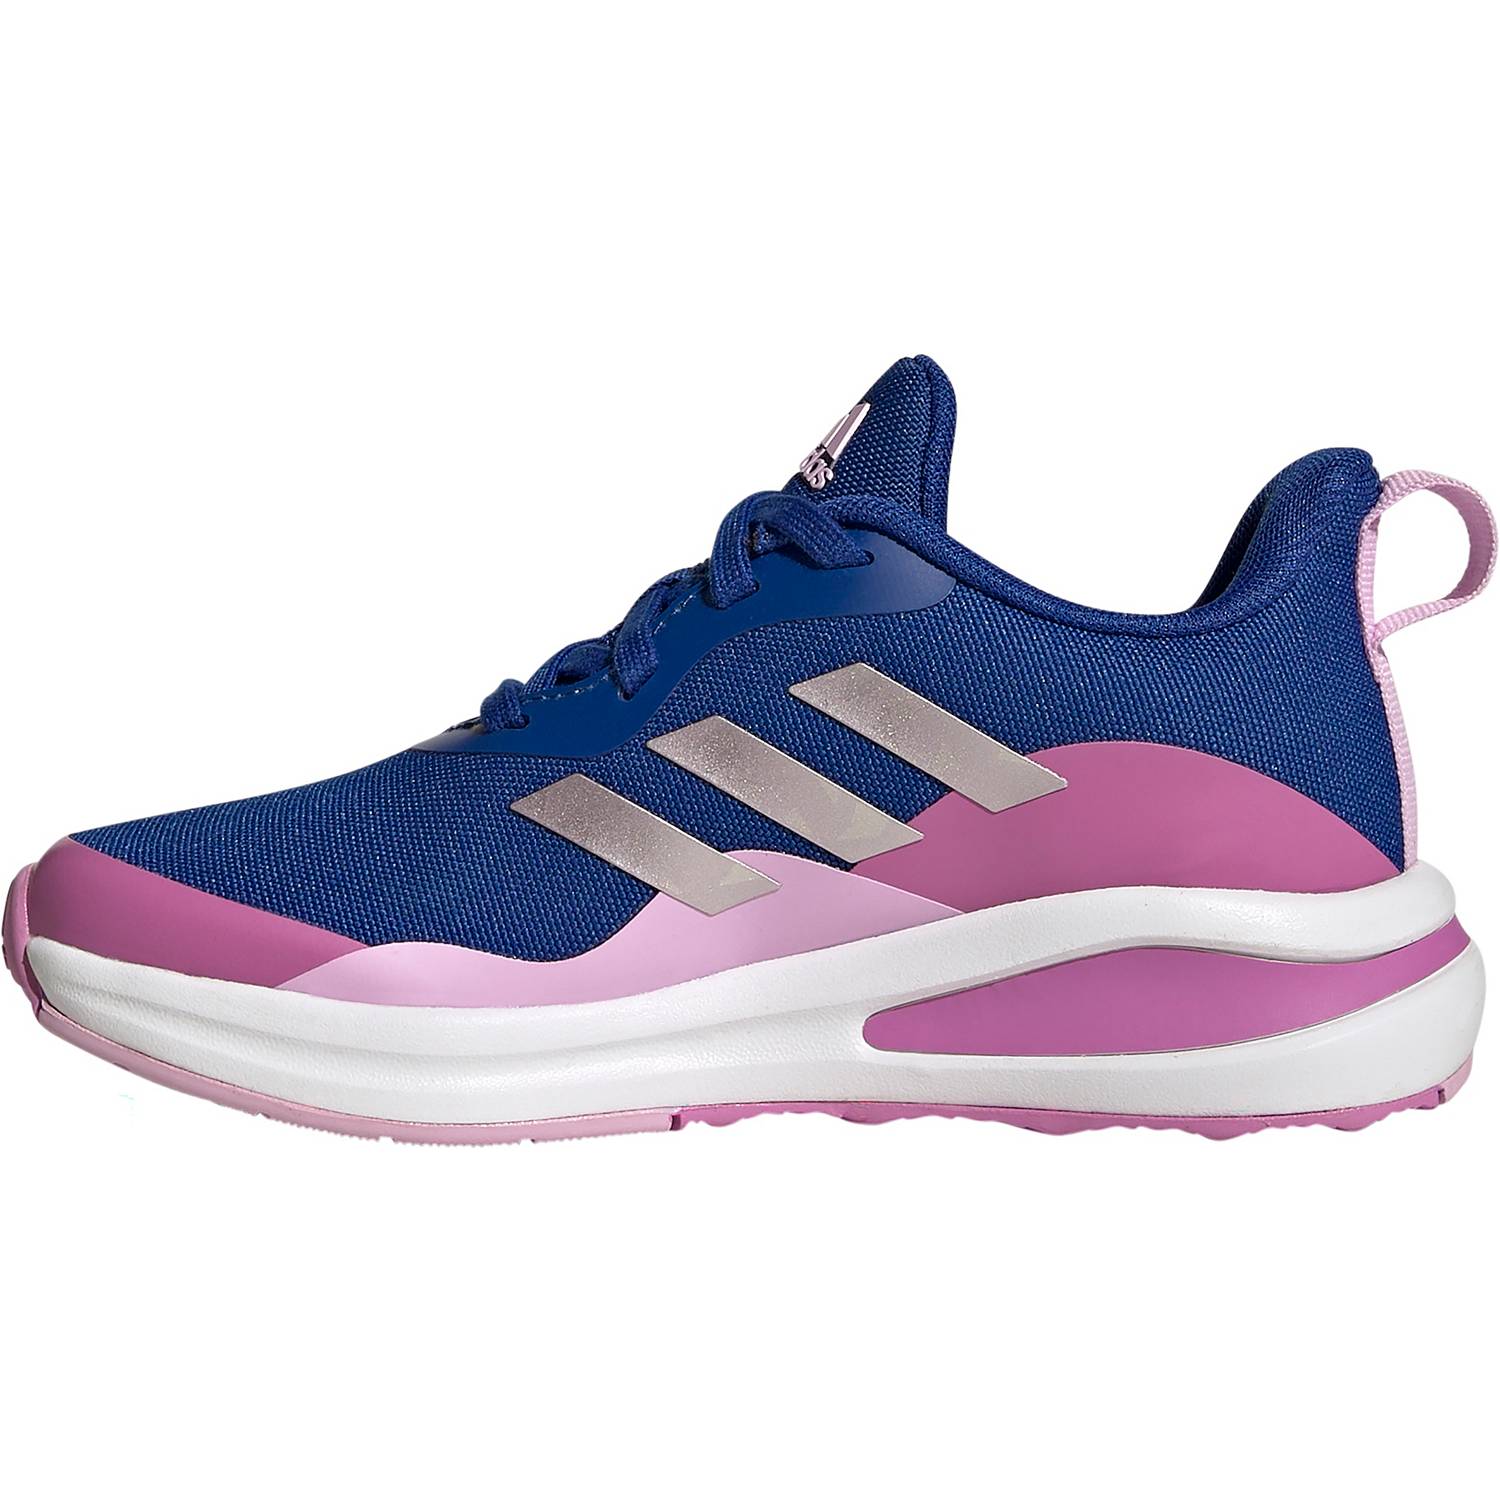 adidas Kids' FortaRun Running Shoes (Court Purple/Blue/Silver, Size 3.5-7) $24.97 + Free Shipping on $49+ or Free Store Pick Up at Dick's Sporting Goods